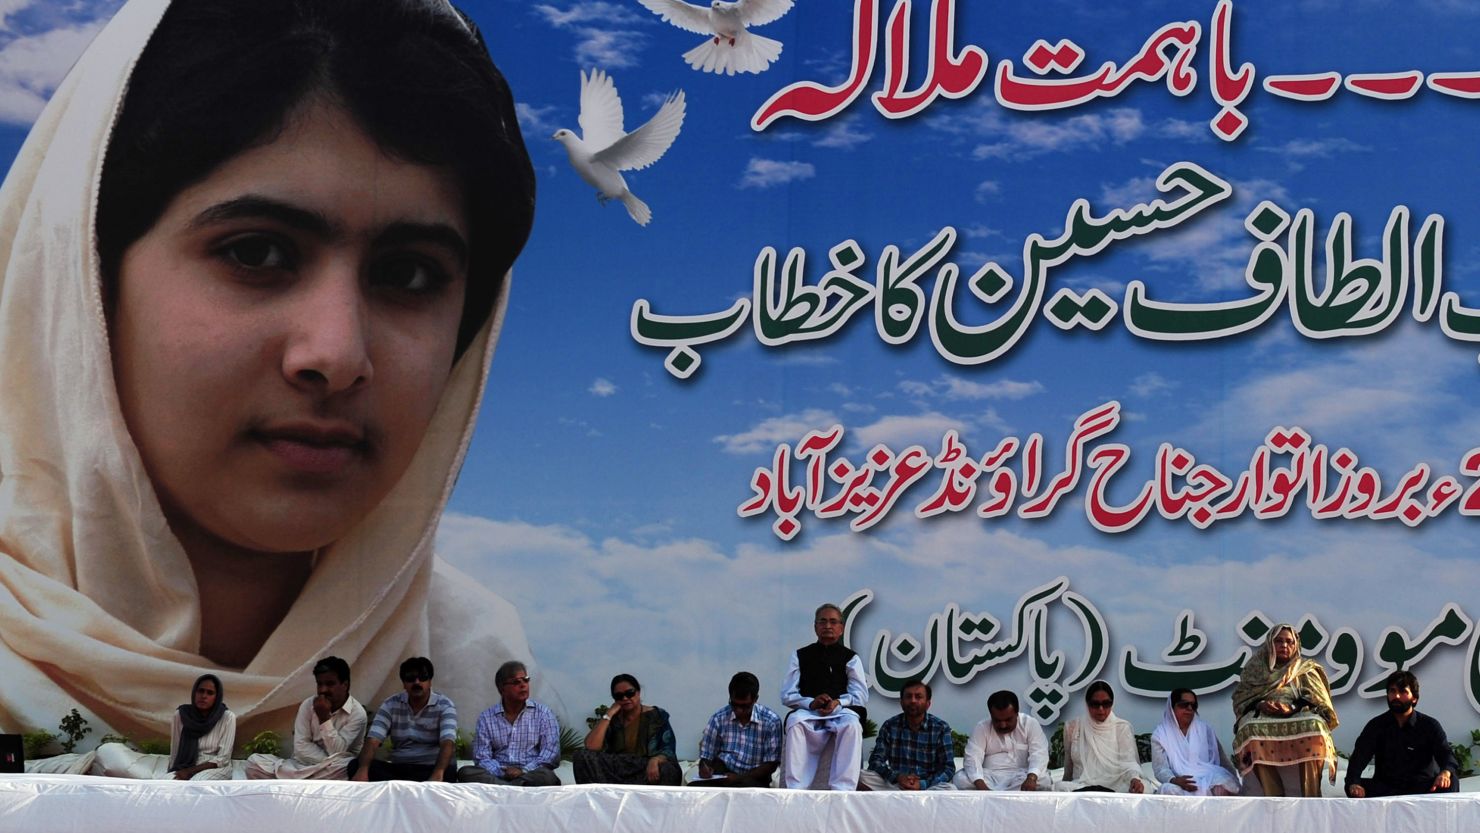 The attempted assassination of Malala Yousufzai by the Pakistan Taliban sparked many protests.